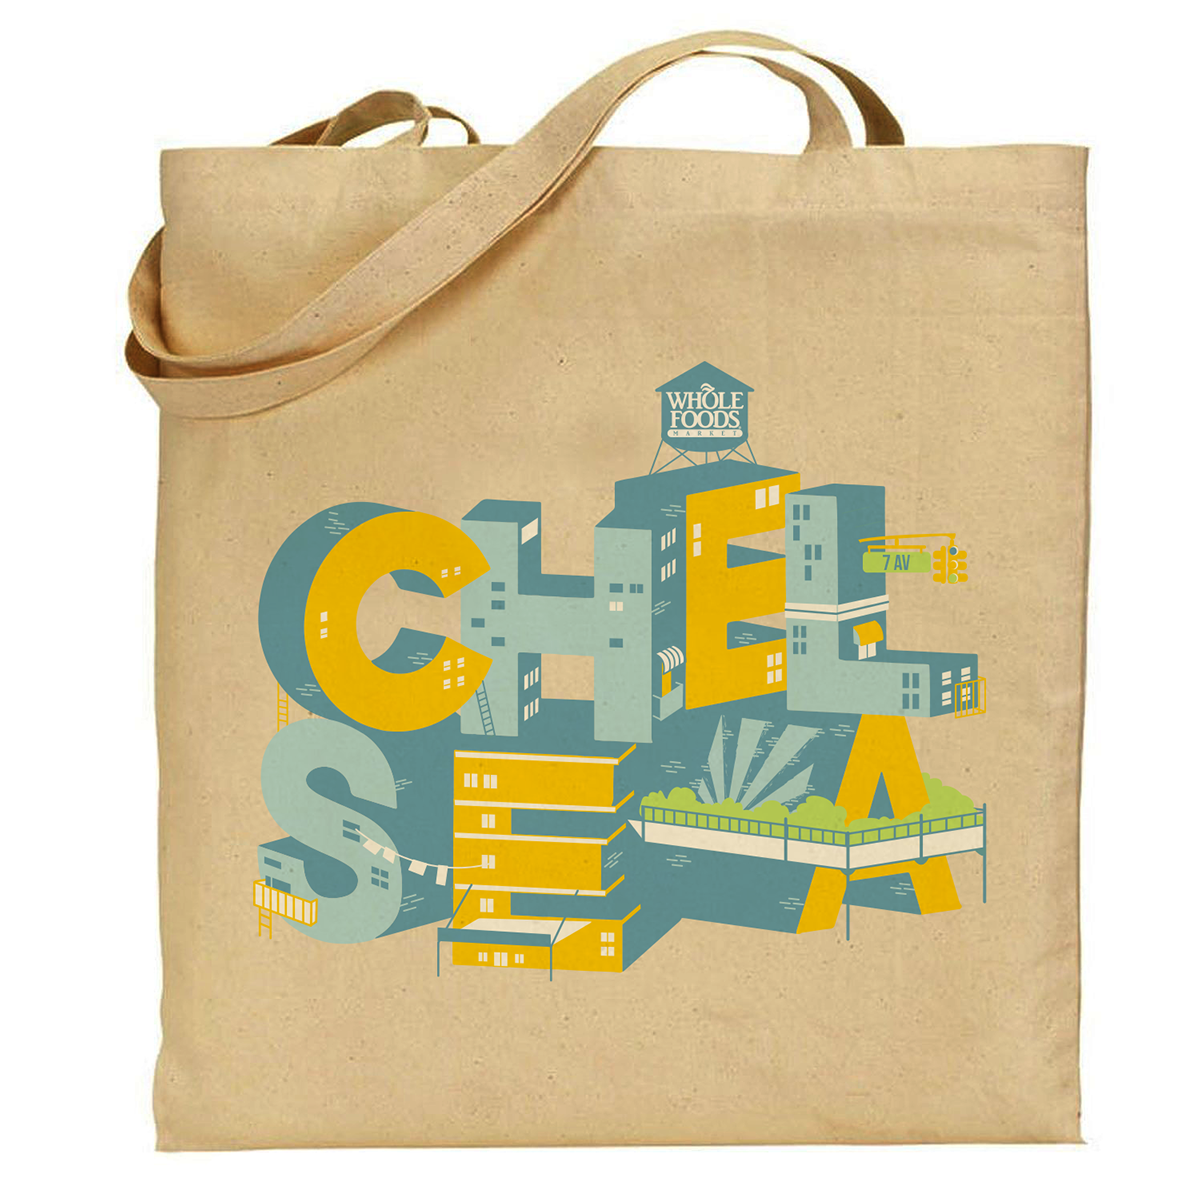 Tote graphic WholeFoods whole Foods produce Chelsea NY nyc